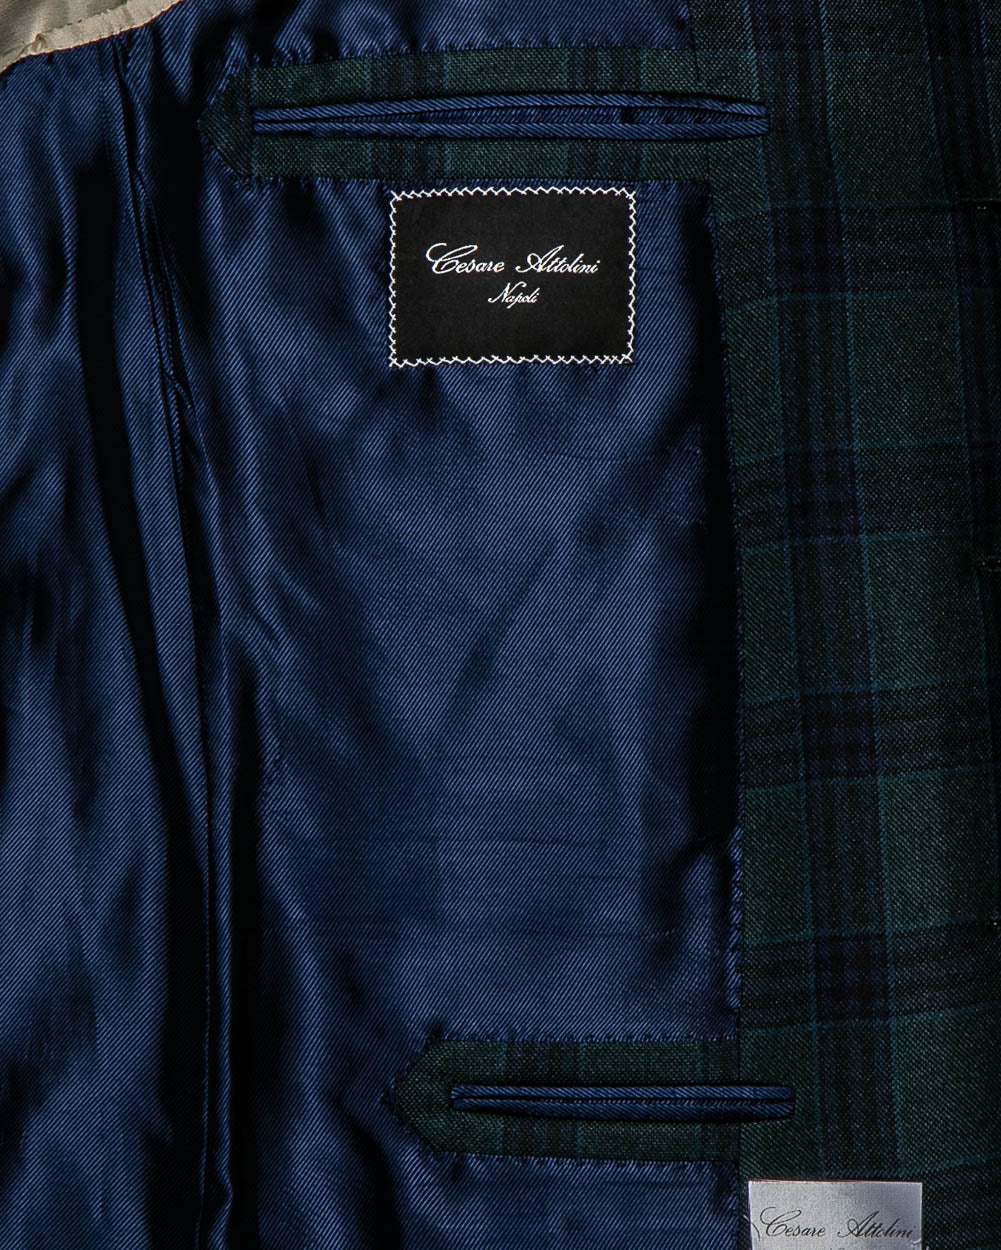 Forest and Navy Plaid Sportcoat